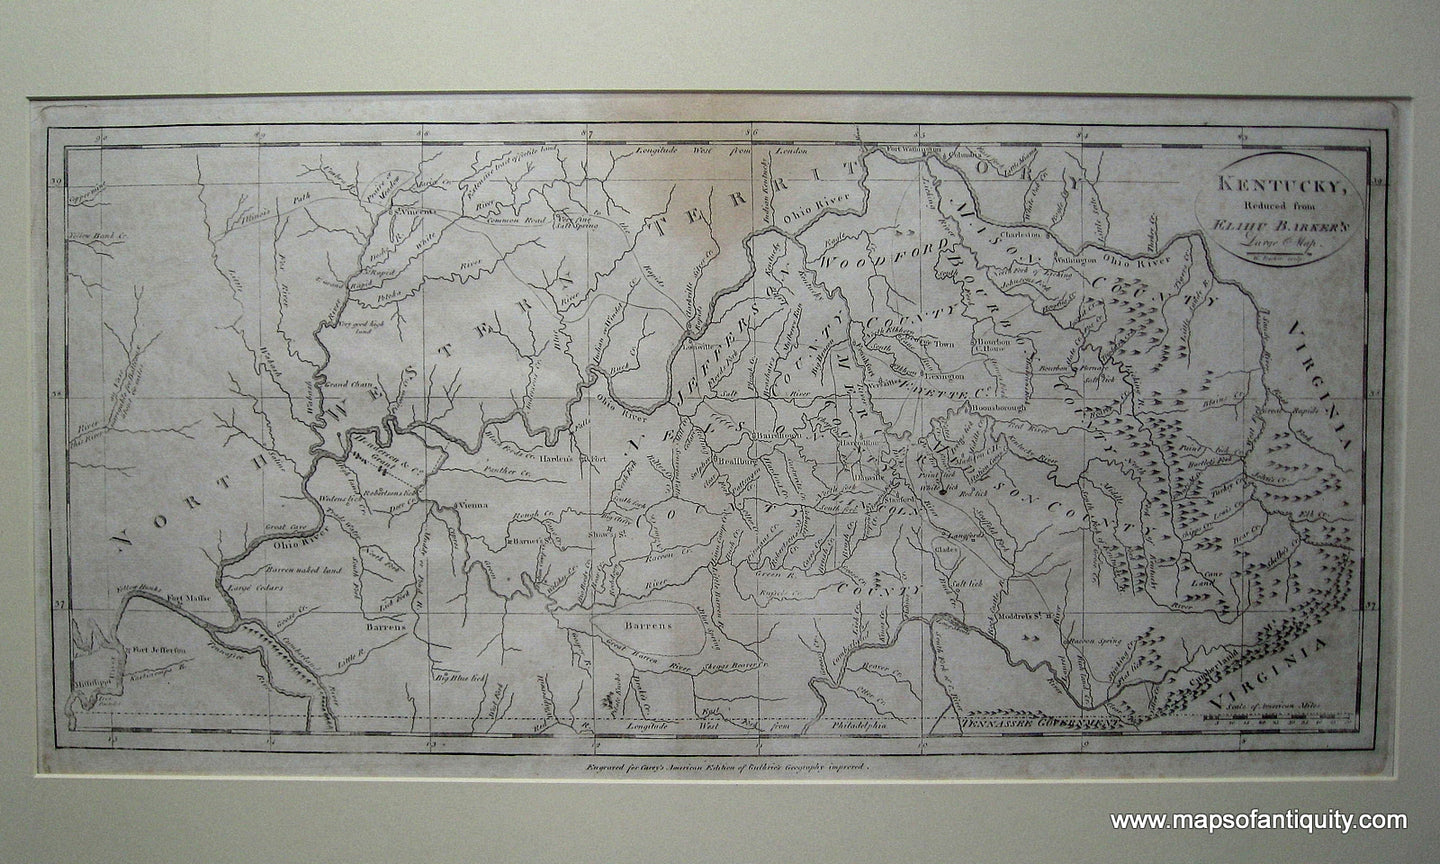 Black-and-White-Antique-Map-Kentucky-Reduced-from-Elihu-Barker's-Large-Map.-**********-United-States-South-1796-Mathew-Carey-Maps-Of-Antiquity